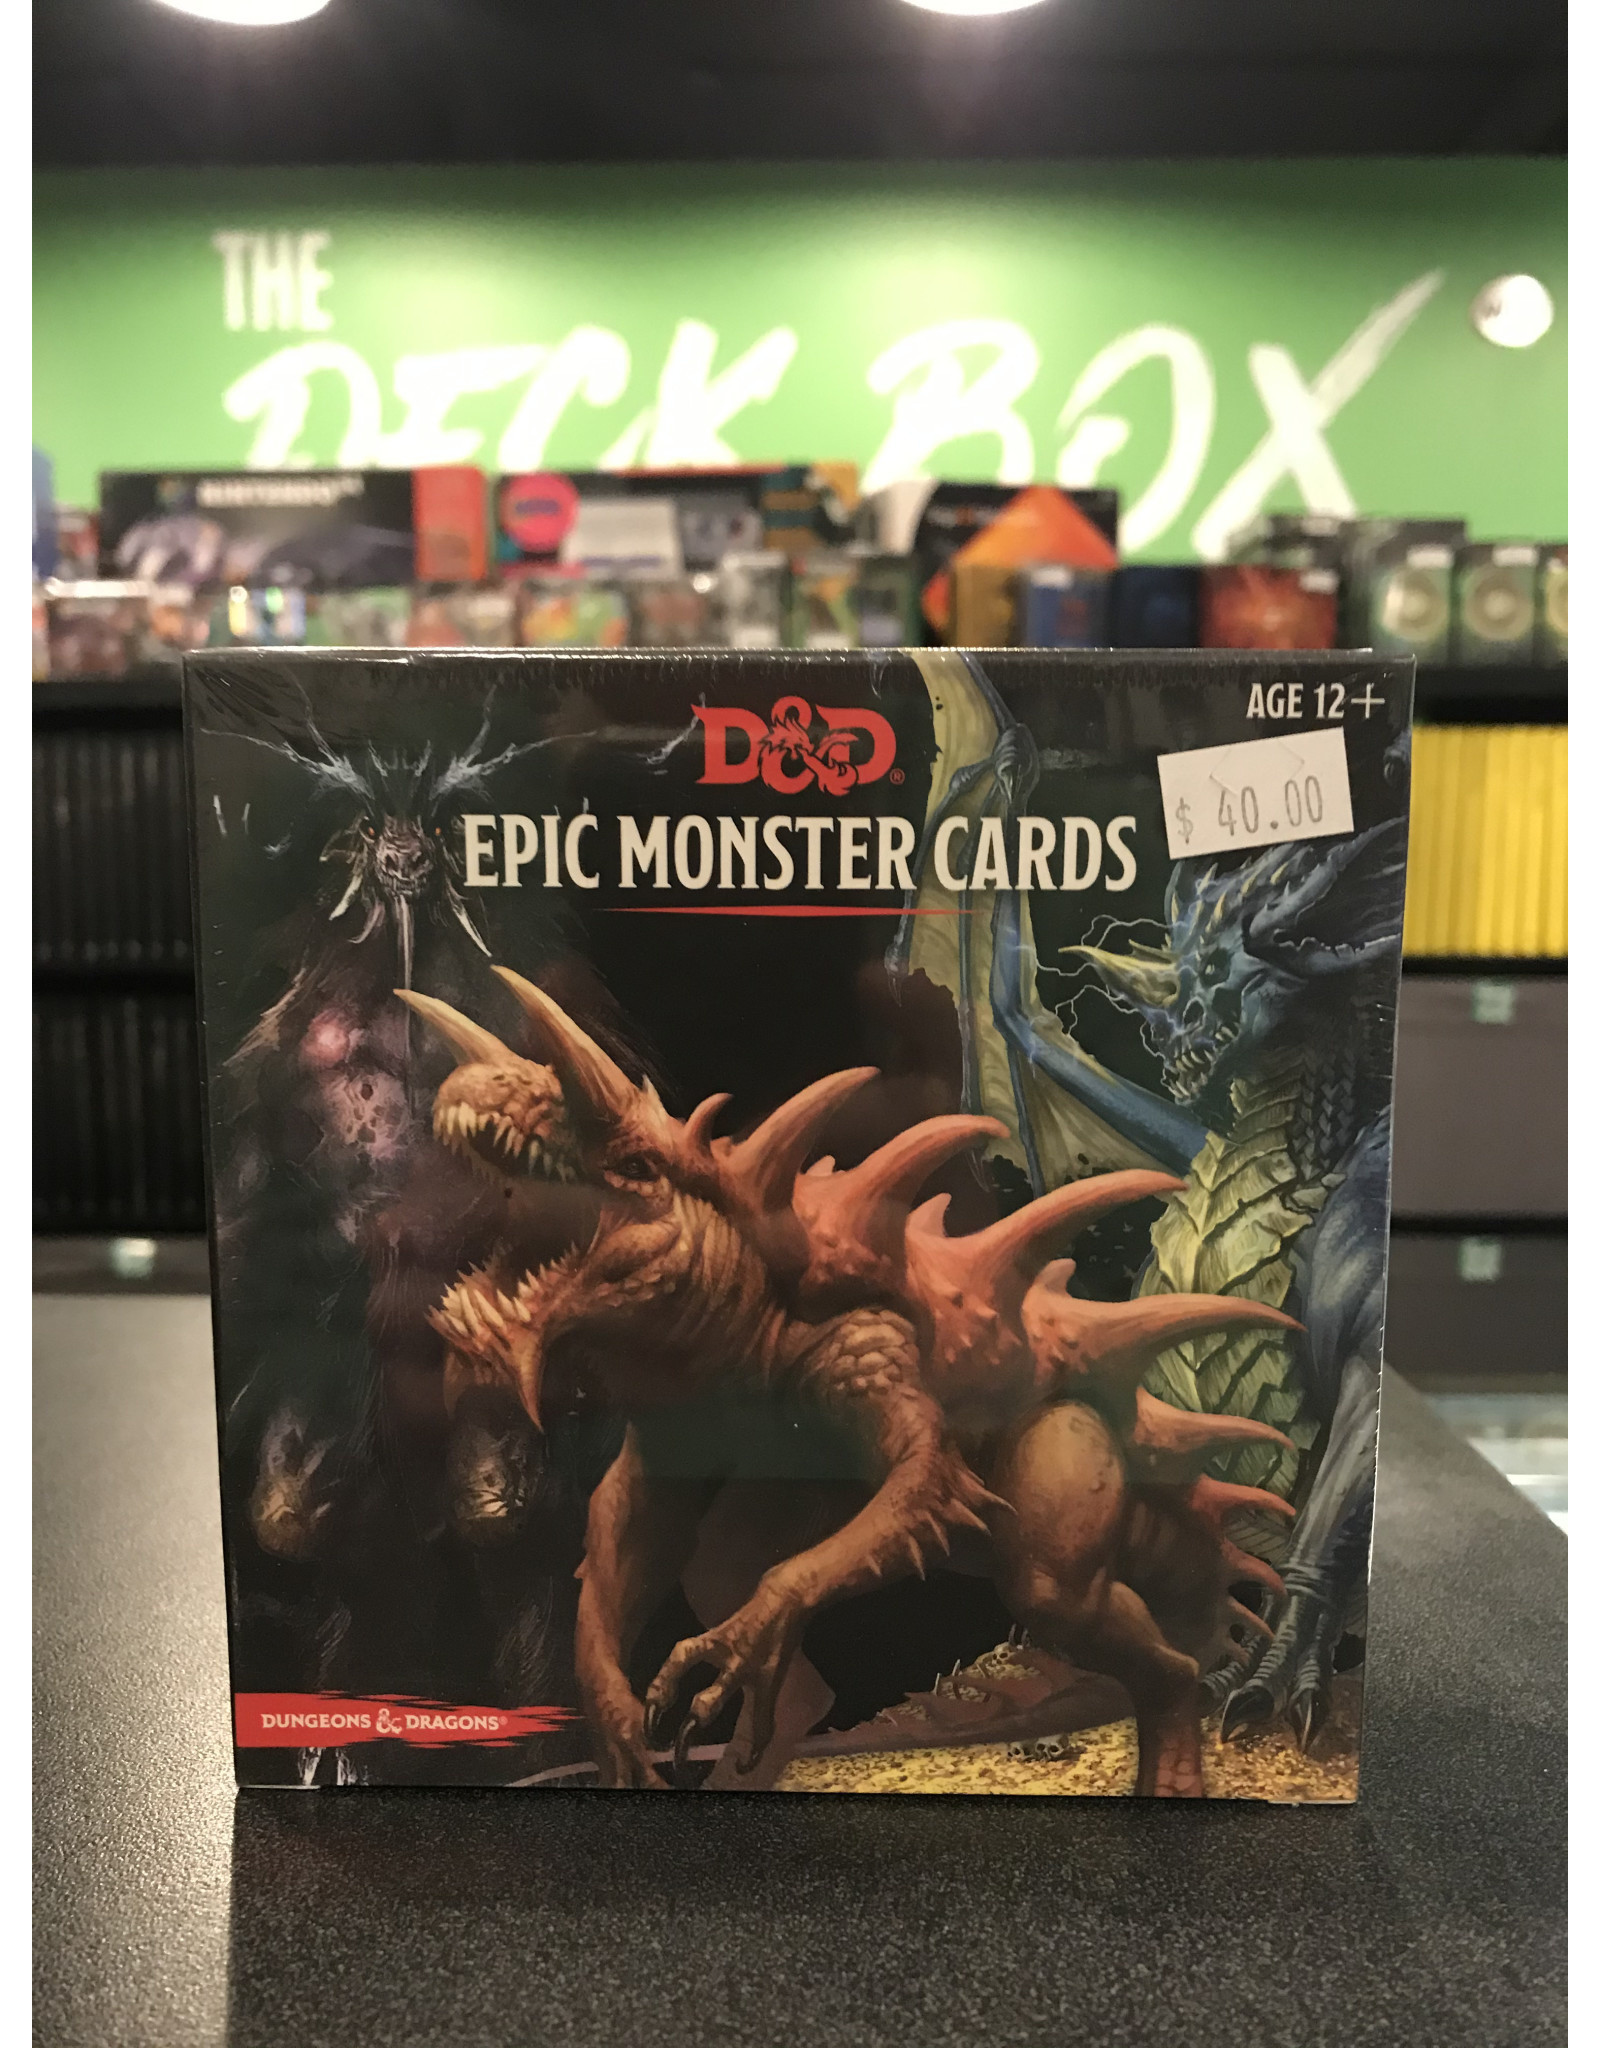 Dungeons & Dragons DND EPIC MONSTER CARDS